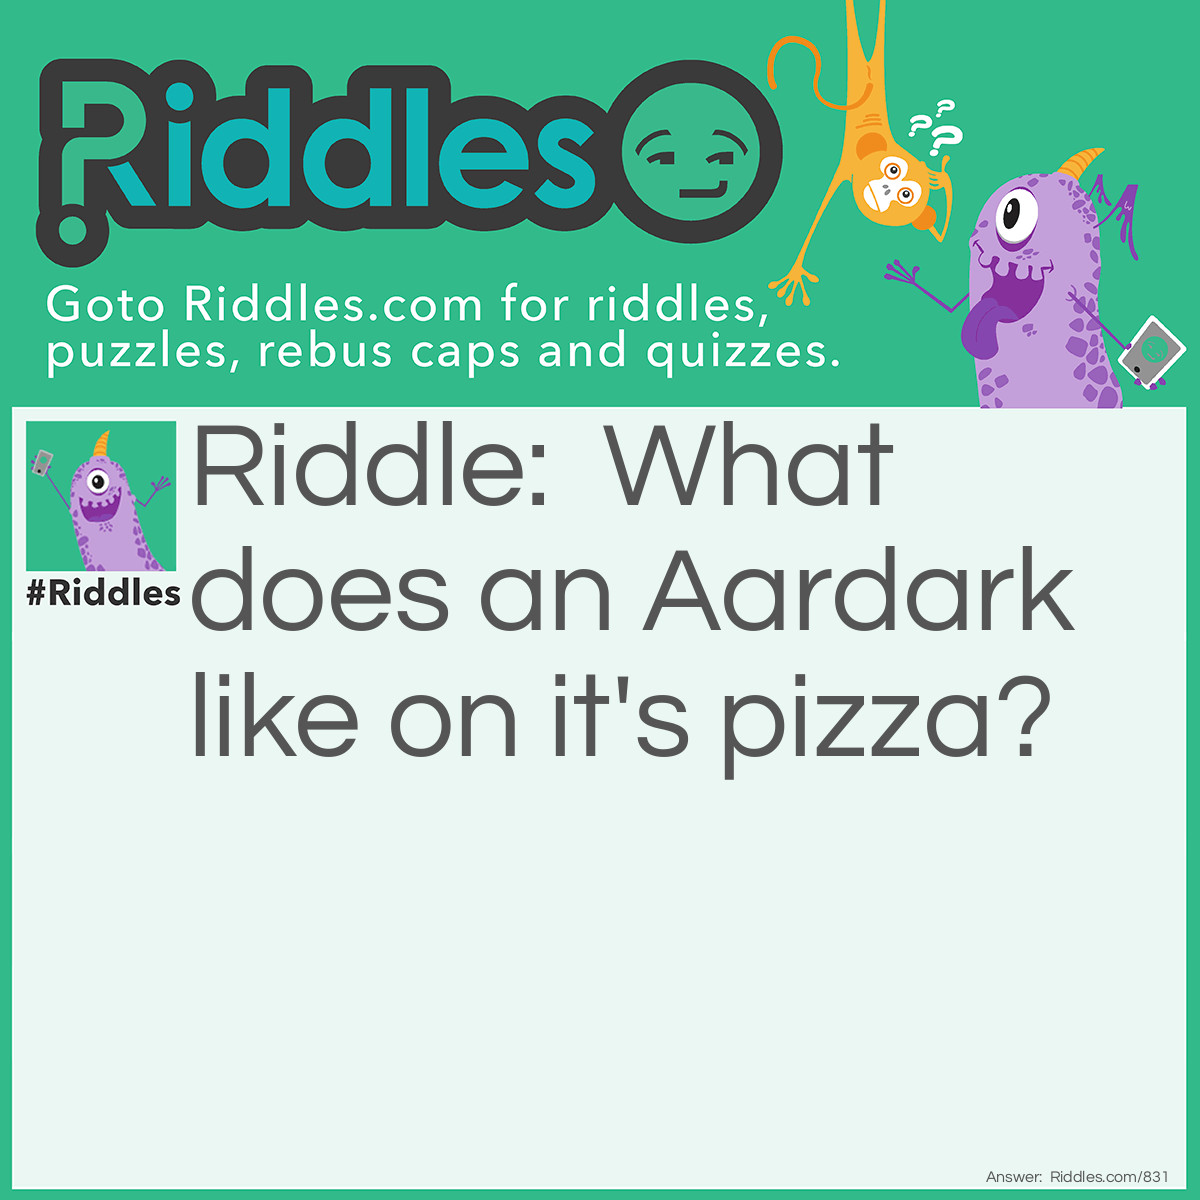 Riddle: What does an Aardark like on its pizza? Answer: Ant-chovies.